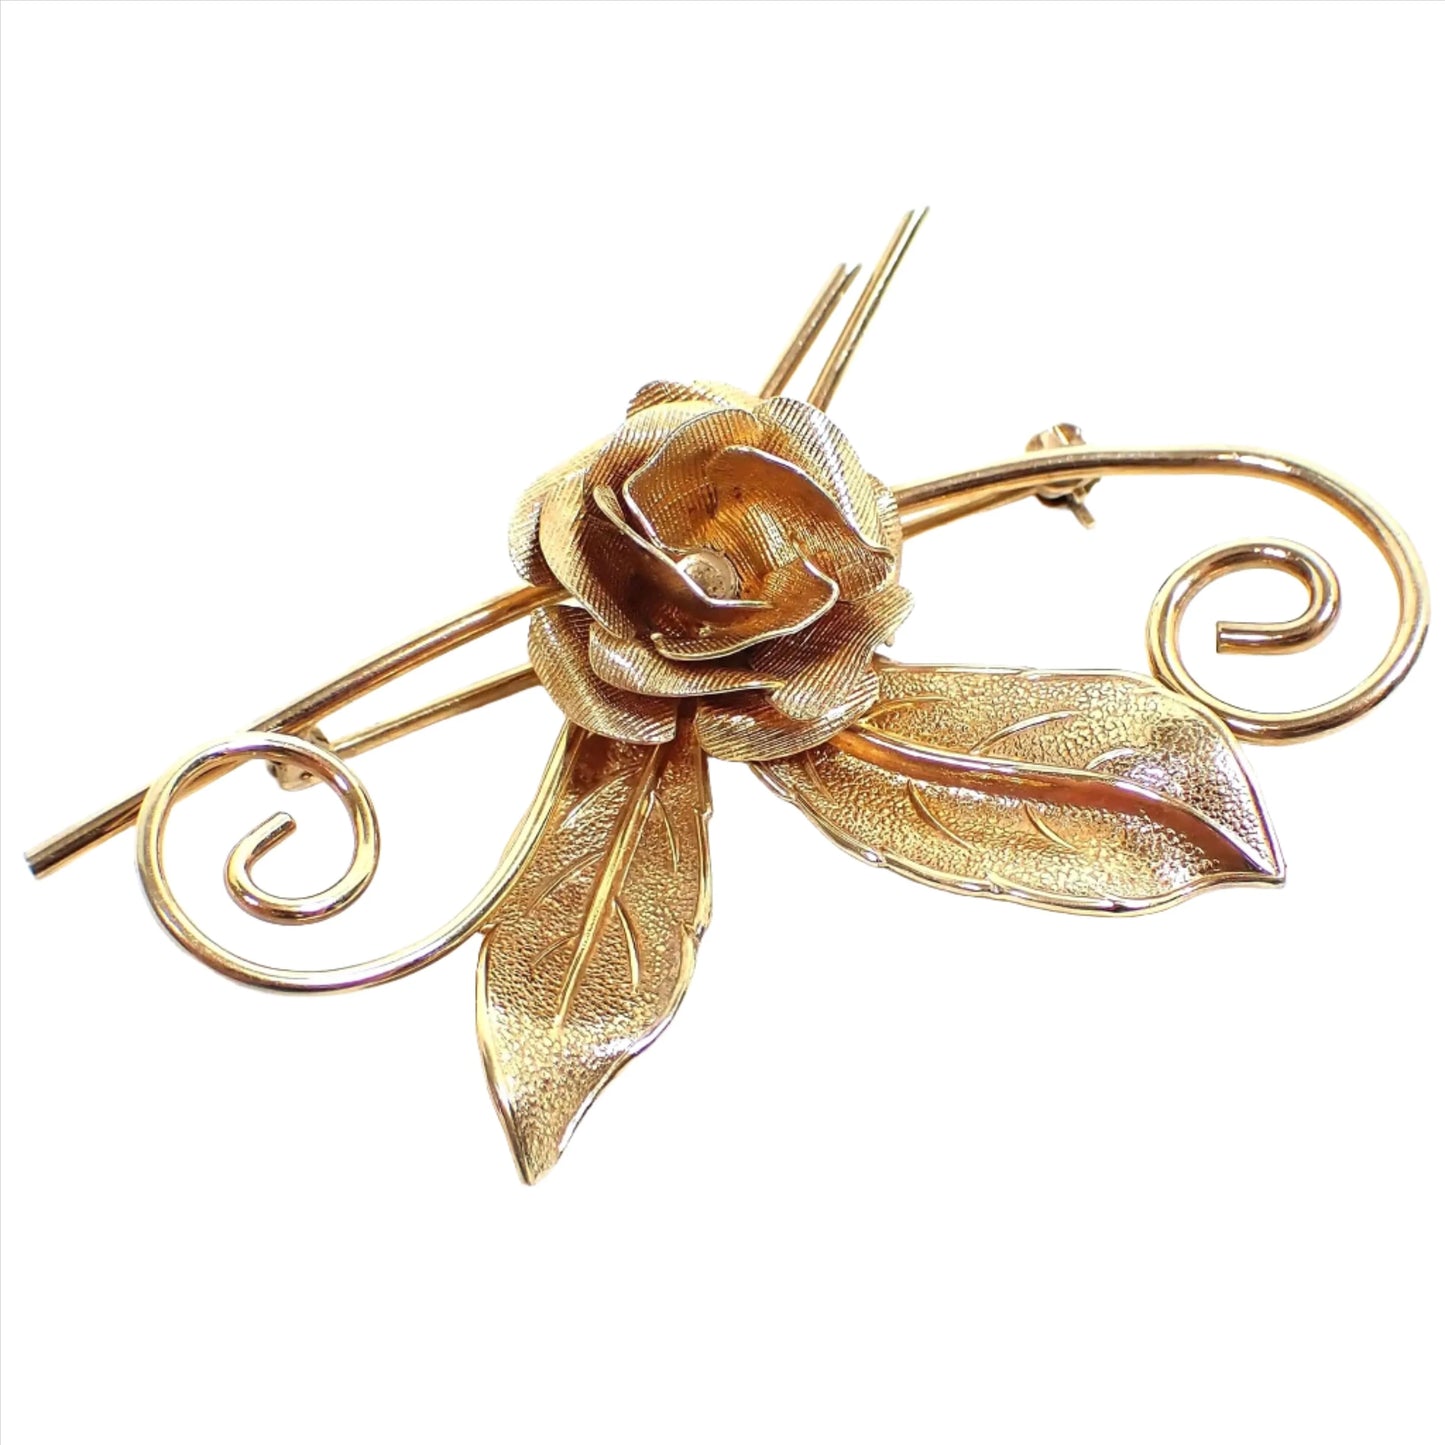 Angled front view of the Mid Century vintage Winard floral brooch pin. The metal is gold filled and a darker gold tone in color. There is a rose flower in the middle with two leaves coming off the bottom. Each side has a curled wire coming off of it. The leaves and flower petals are matte textured.